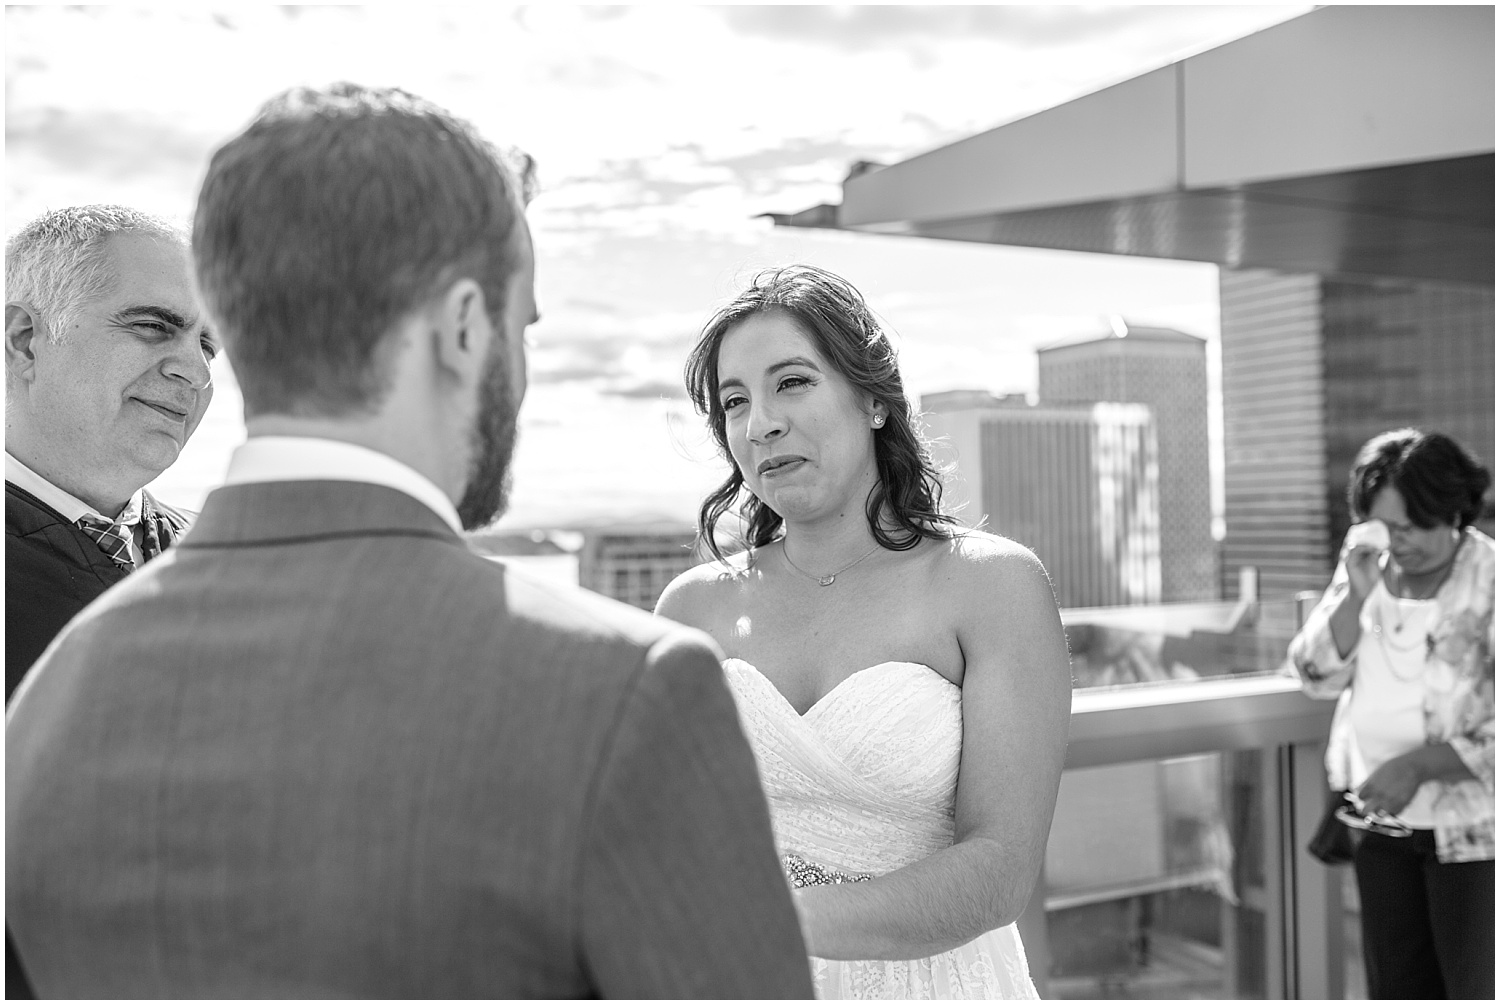 Seattle Municipal Court wedding ceremony on the rooftop, with a view of downtown Seattle.